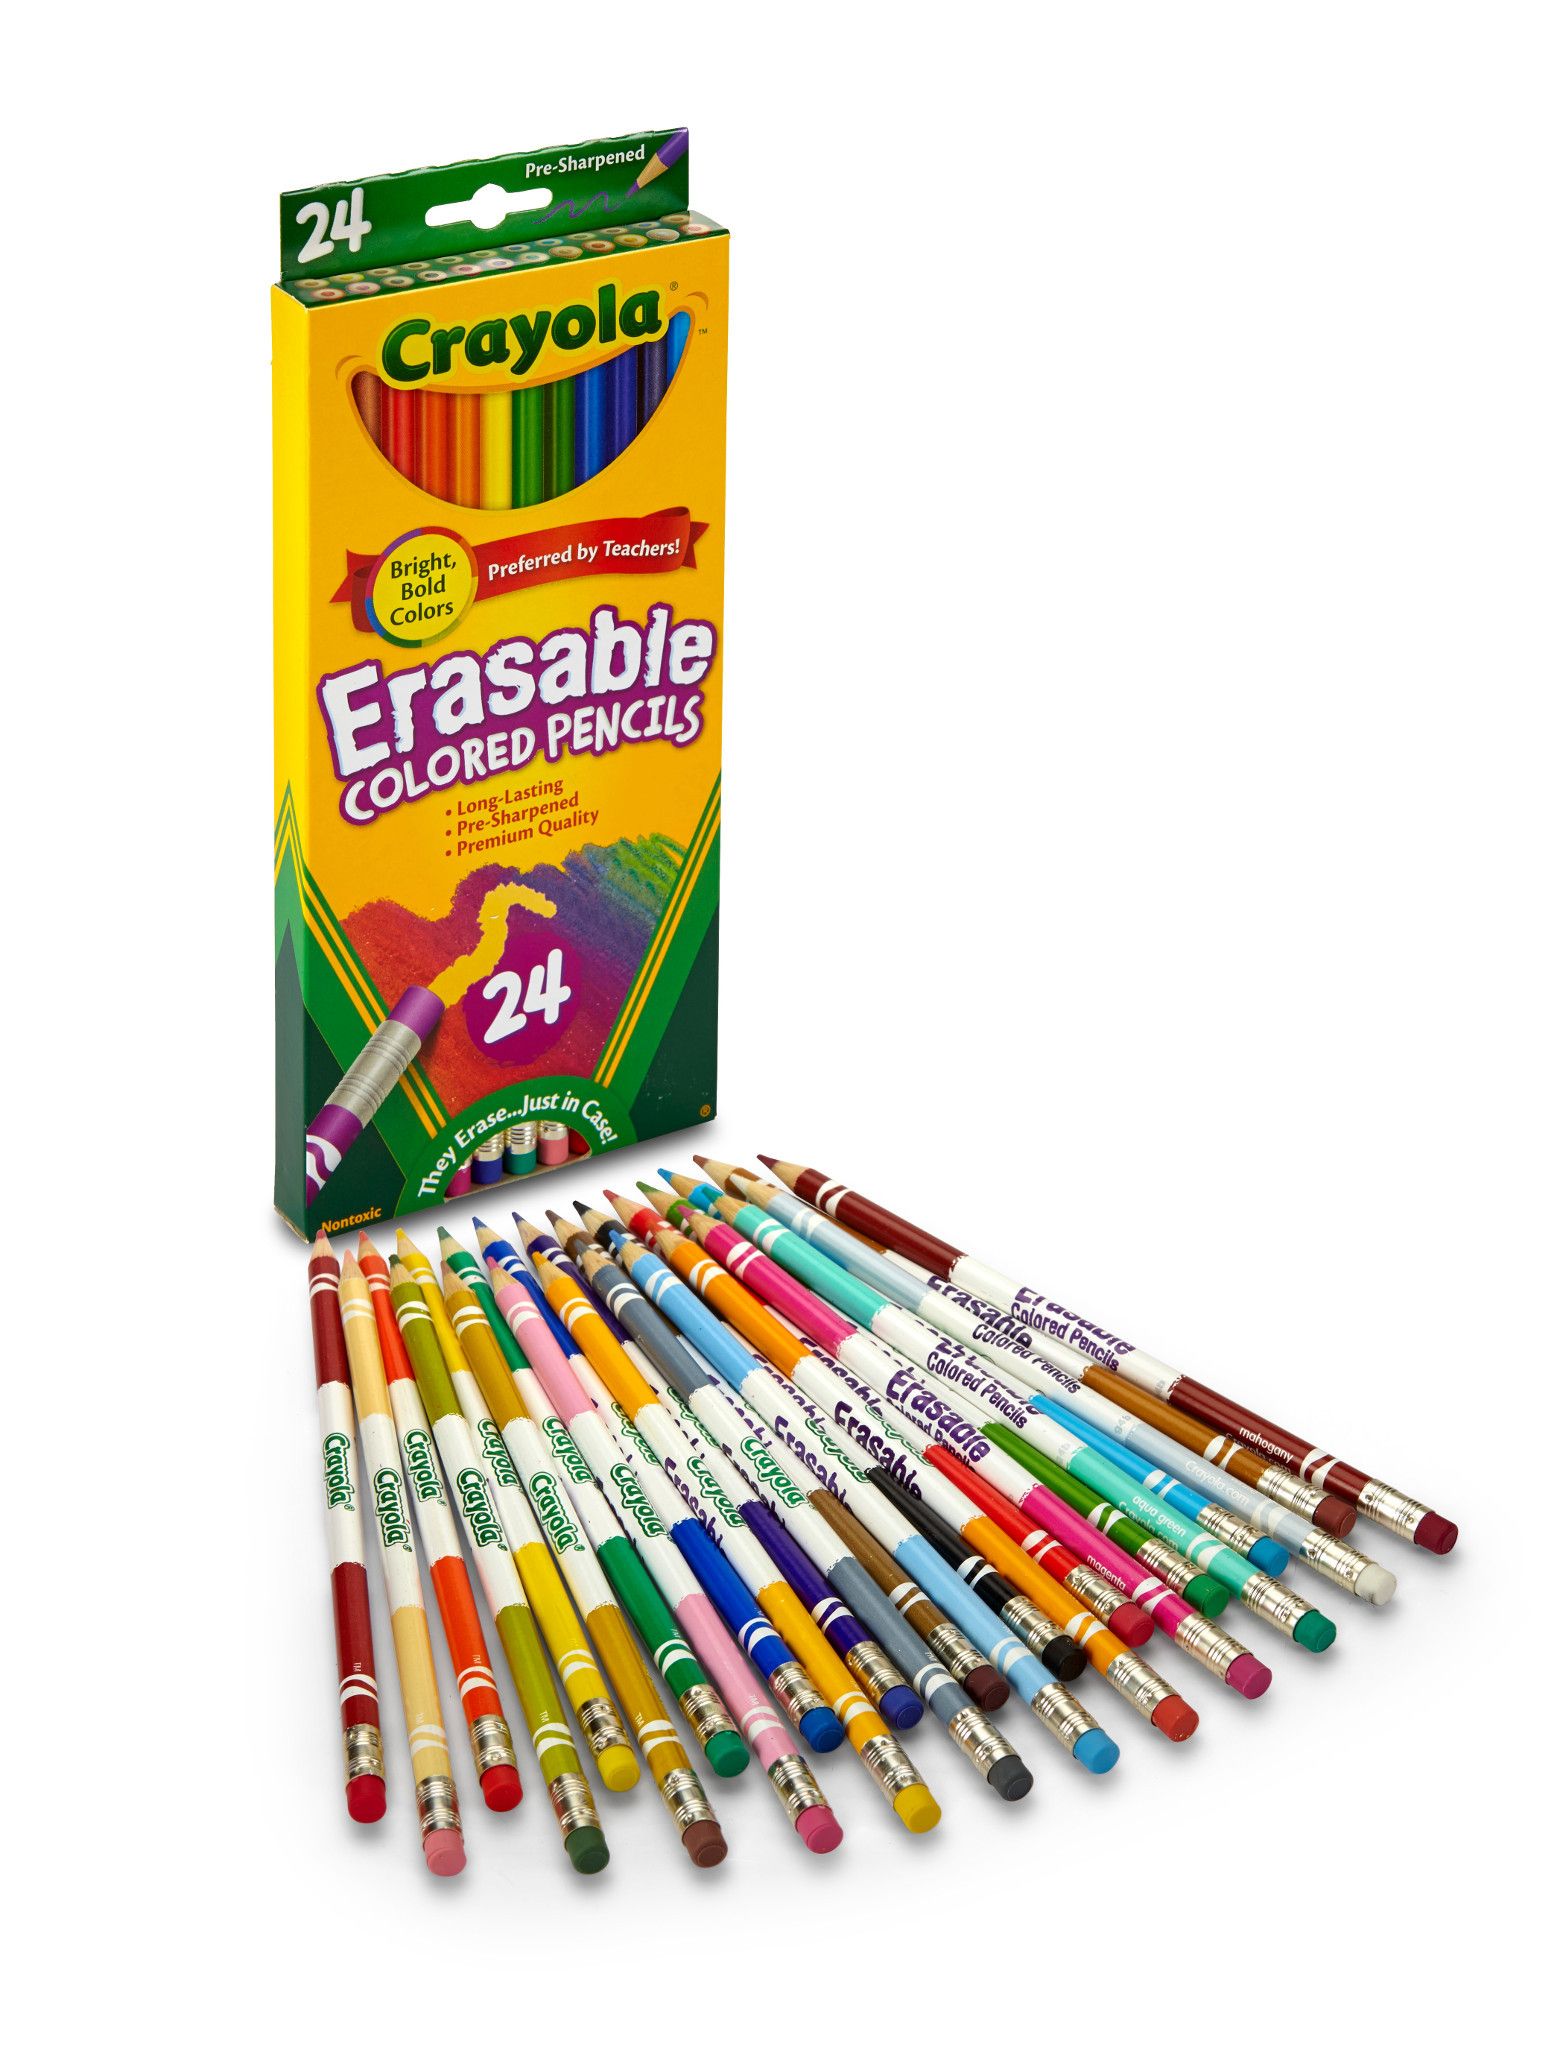 Crayola Erasable Colored Pencils, 24 Ct, School Supplies for Teens, Art Tools, Adult Coloring - image 3 of 8